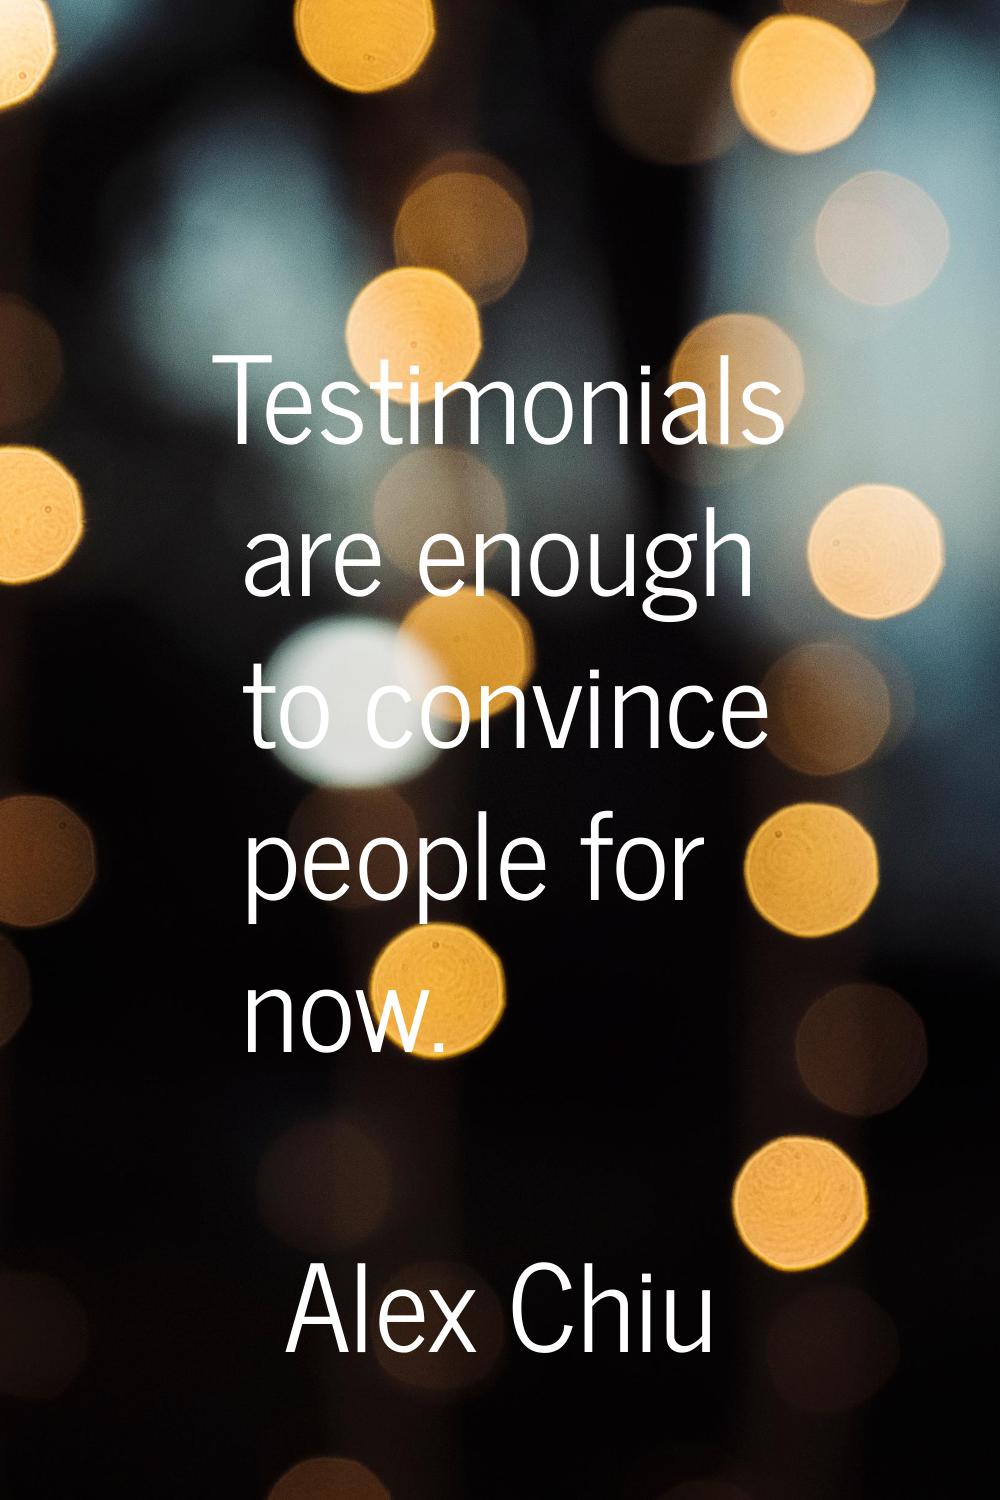 Testimonials are enough to convince people for now.